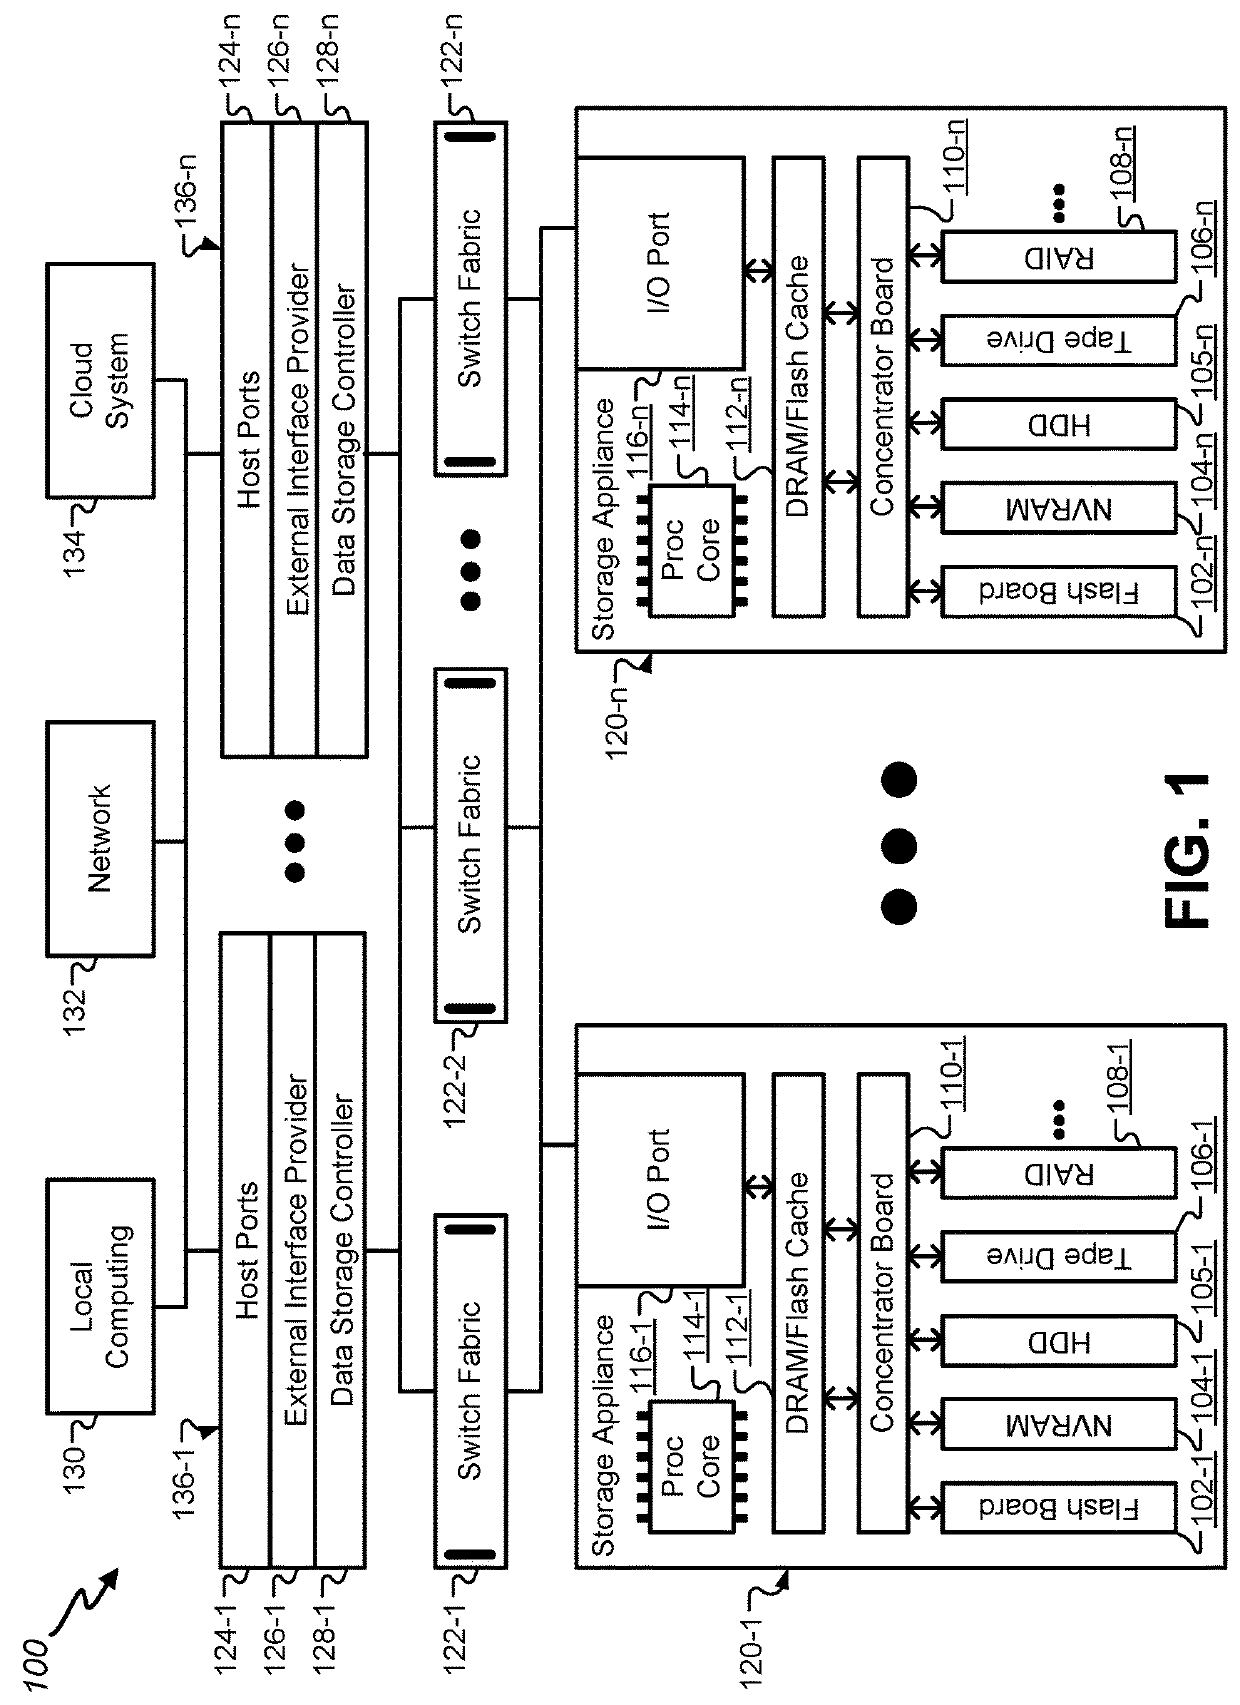 Rule-based modifications in a data storage appliance monitor